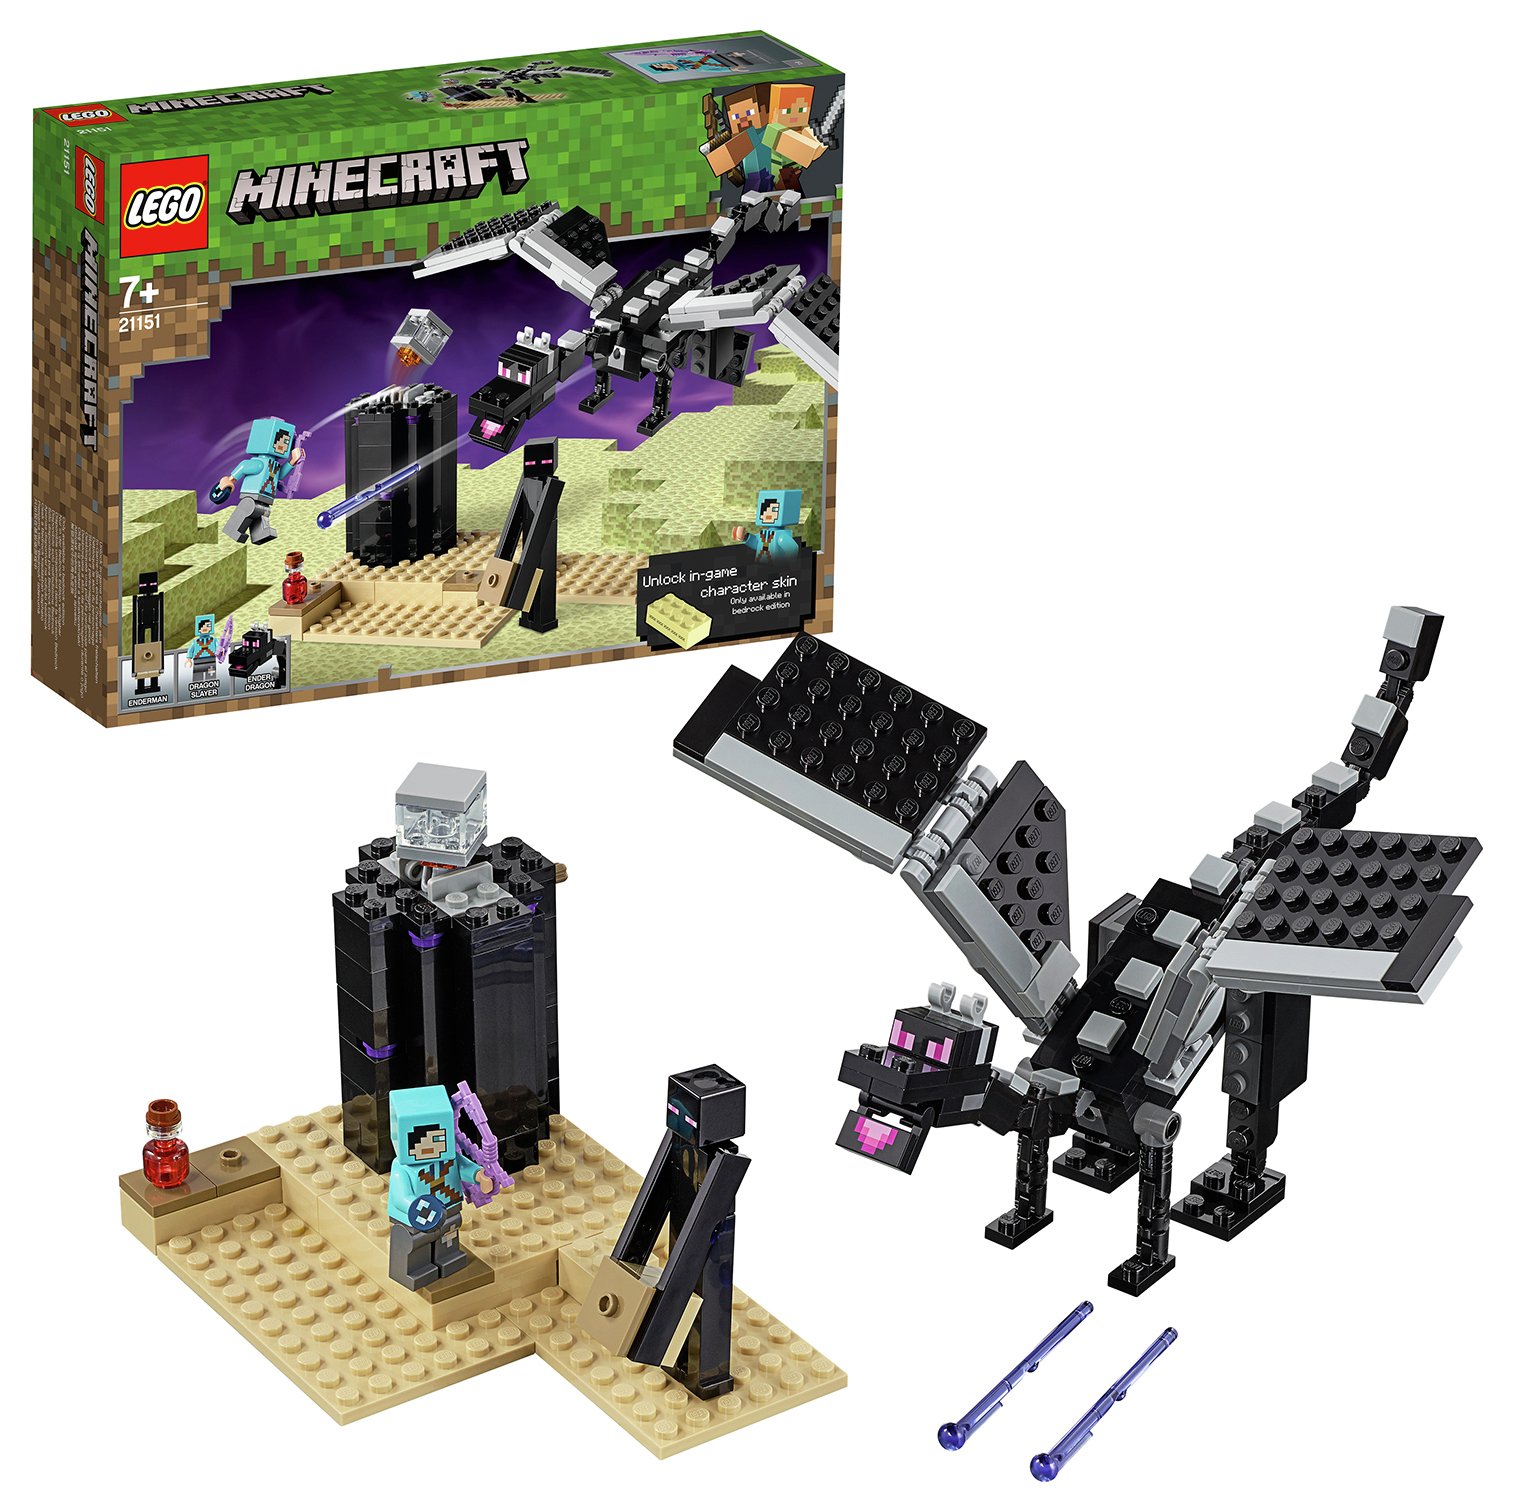 LEGO Minecraft The End Battle Dragon Toy Set Review